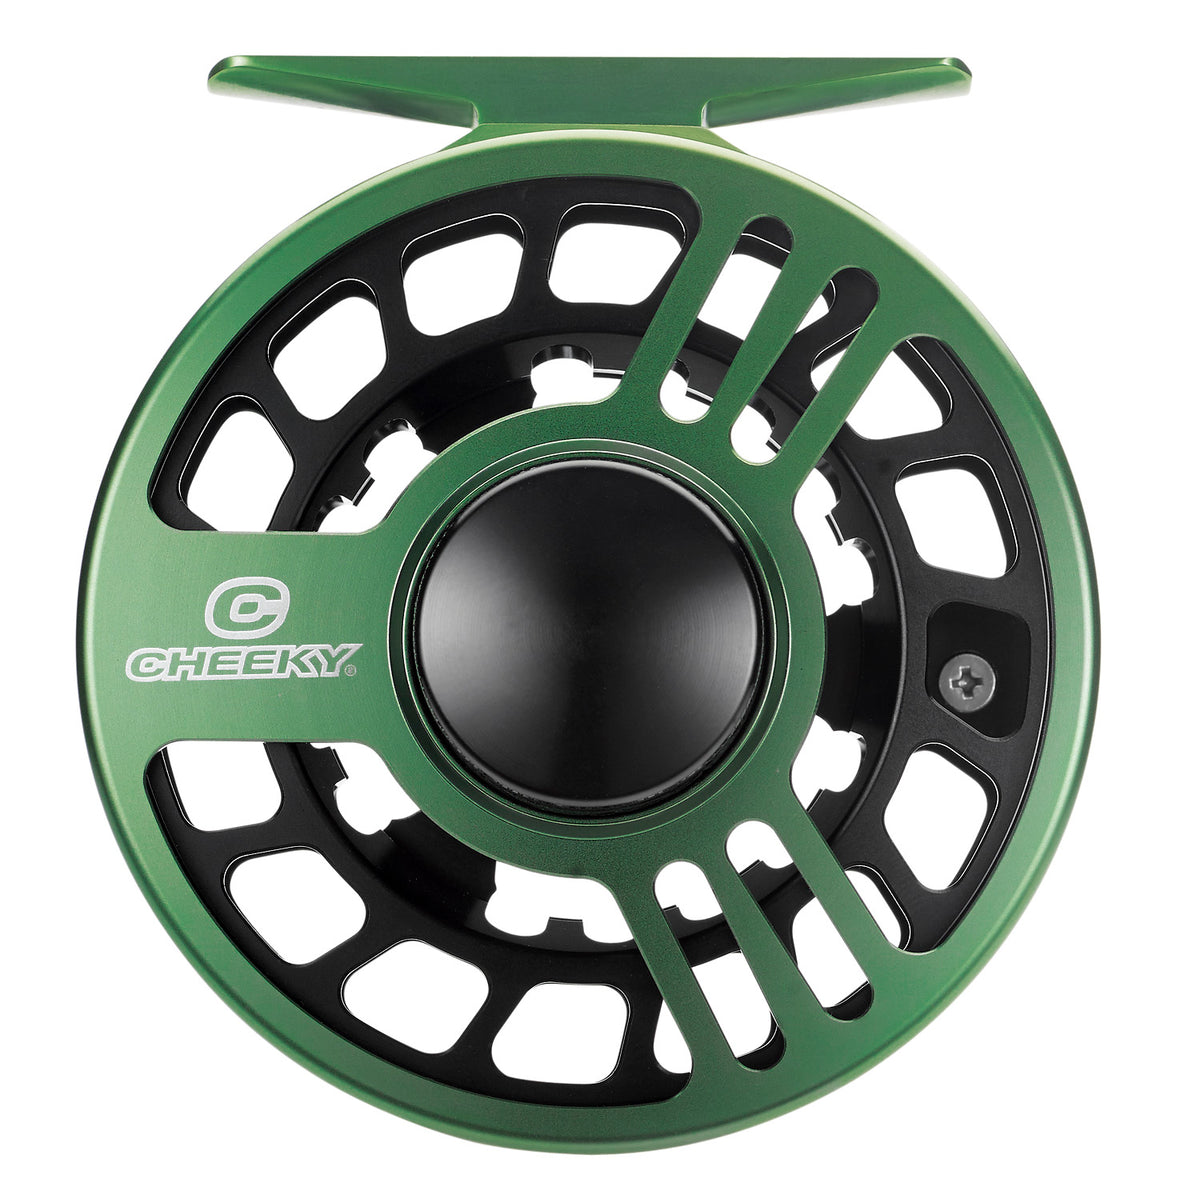 Cheeky Launch 325 Fly Reel – The Tackle Shop